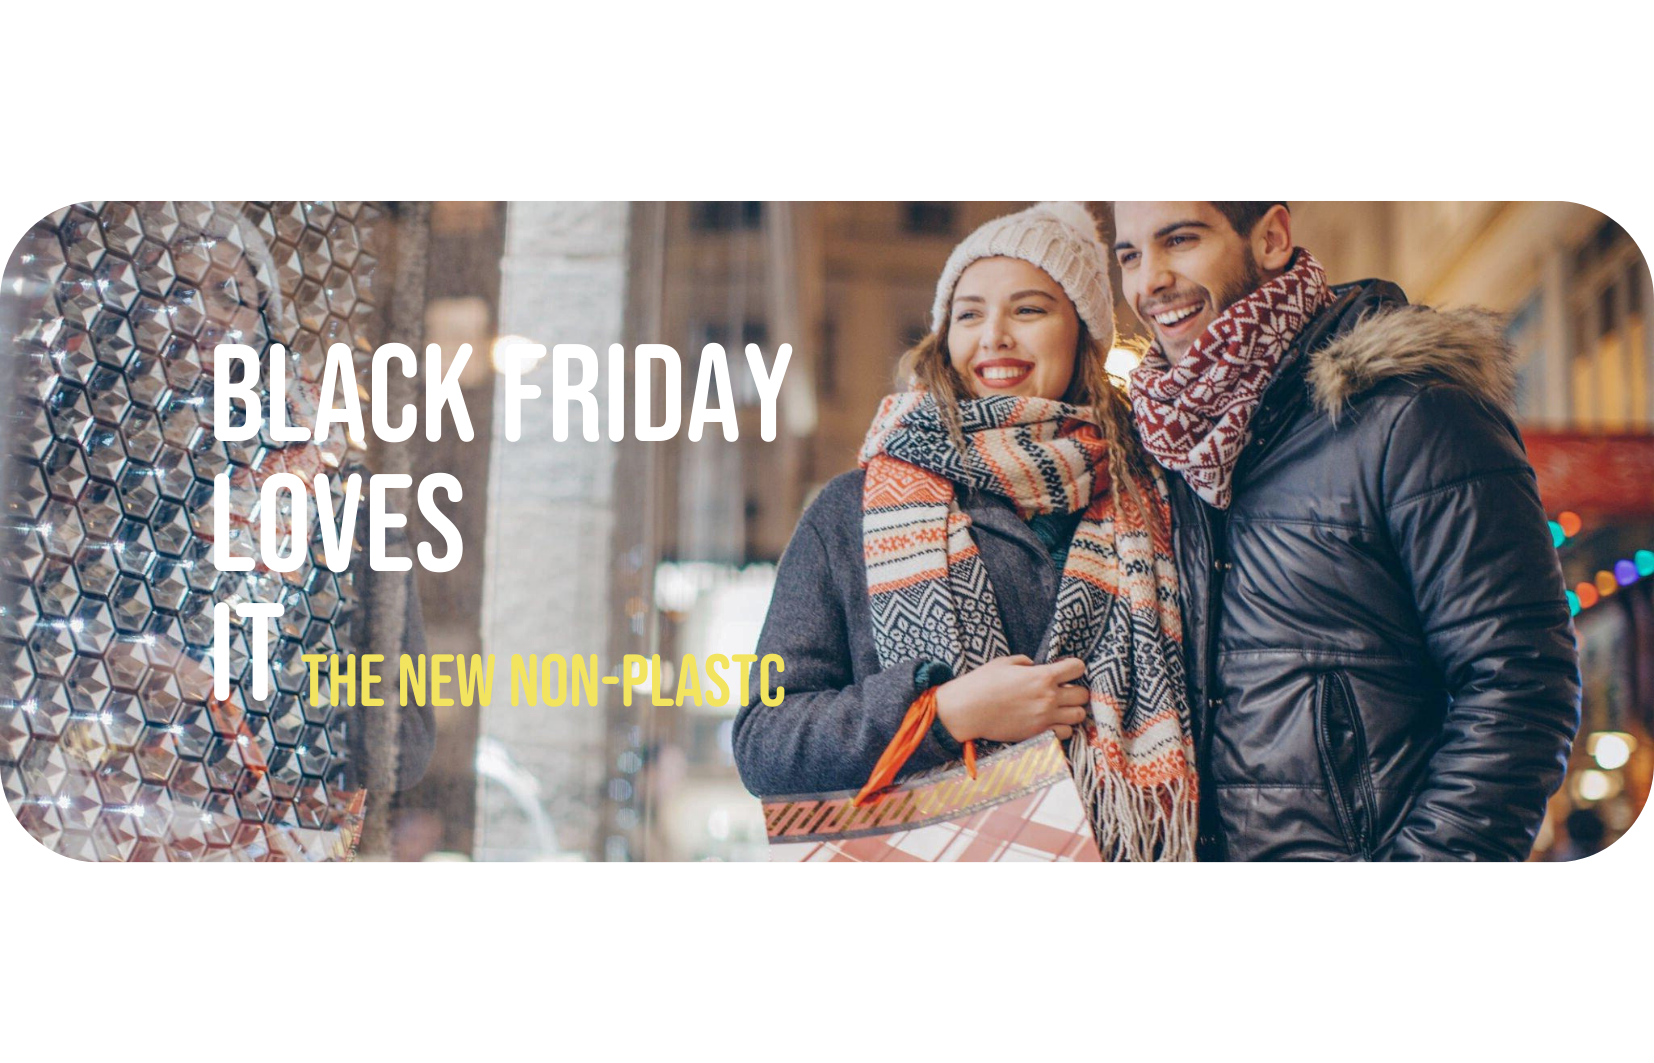 Shopping with a Green Heart: An Eco-Friendly Black Friday Guide